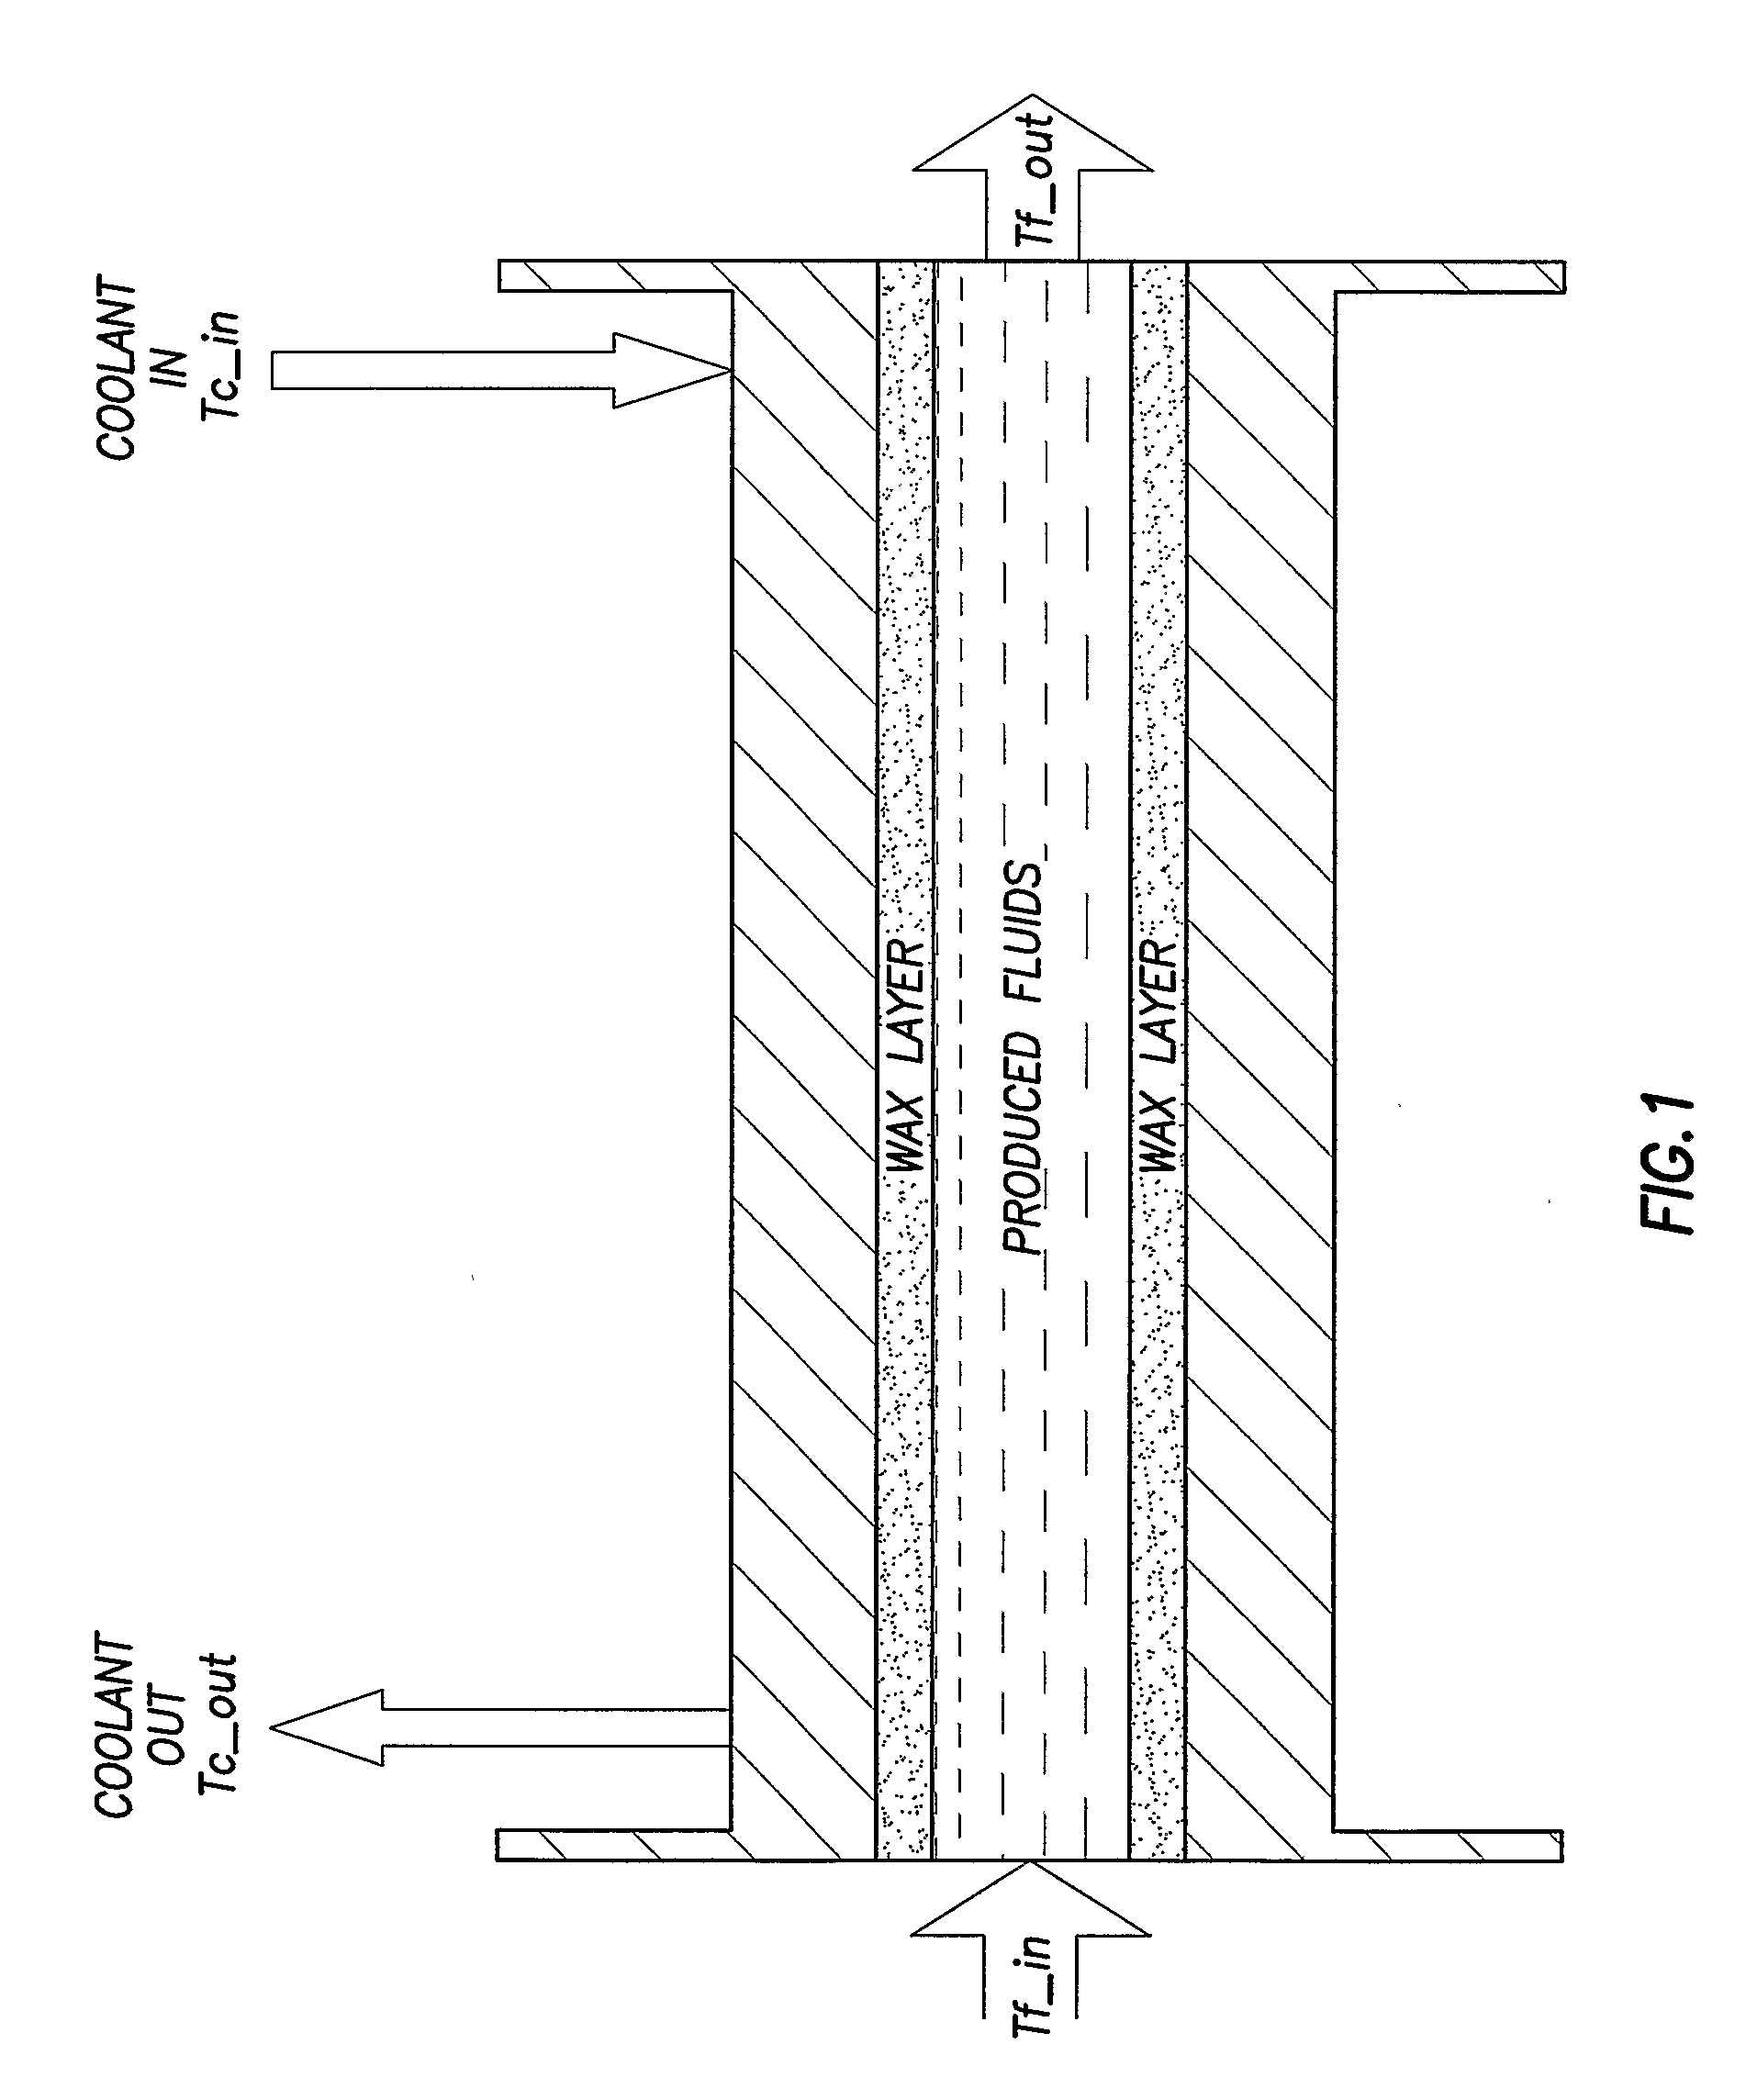 Method and Apparatus for a Cold Flow Subsea Hydrocarbon Production System